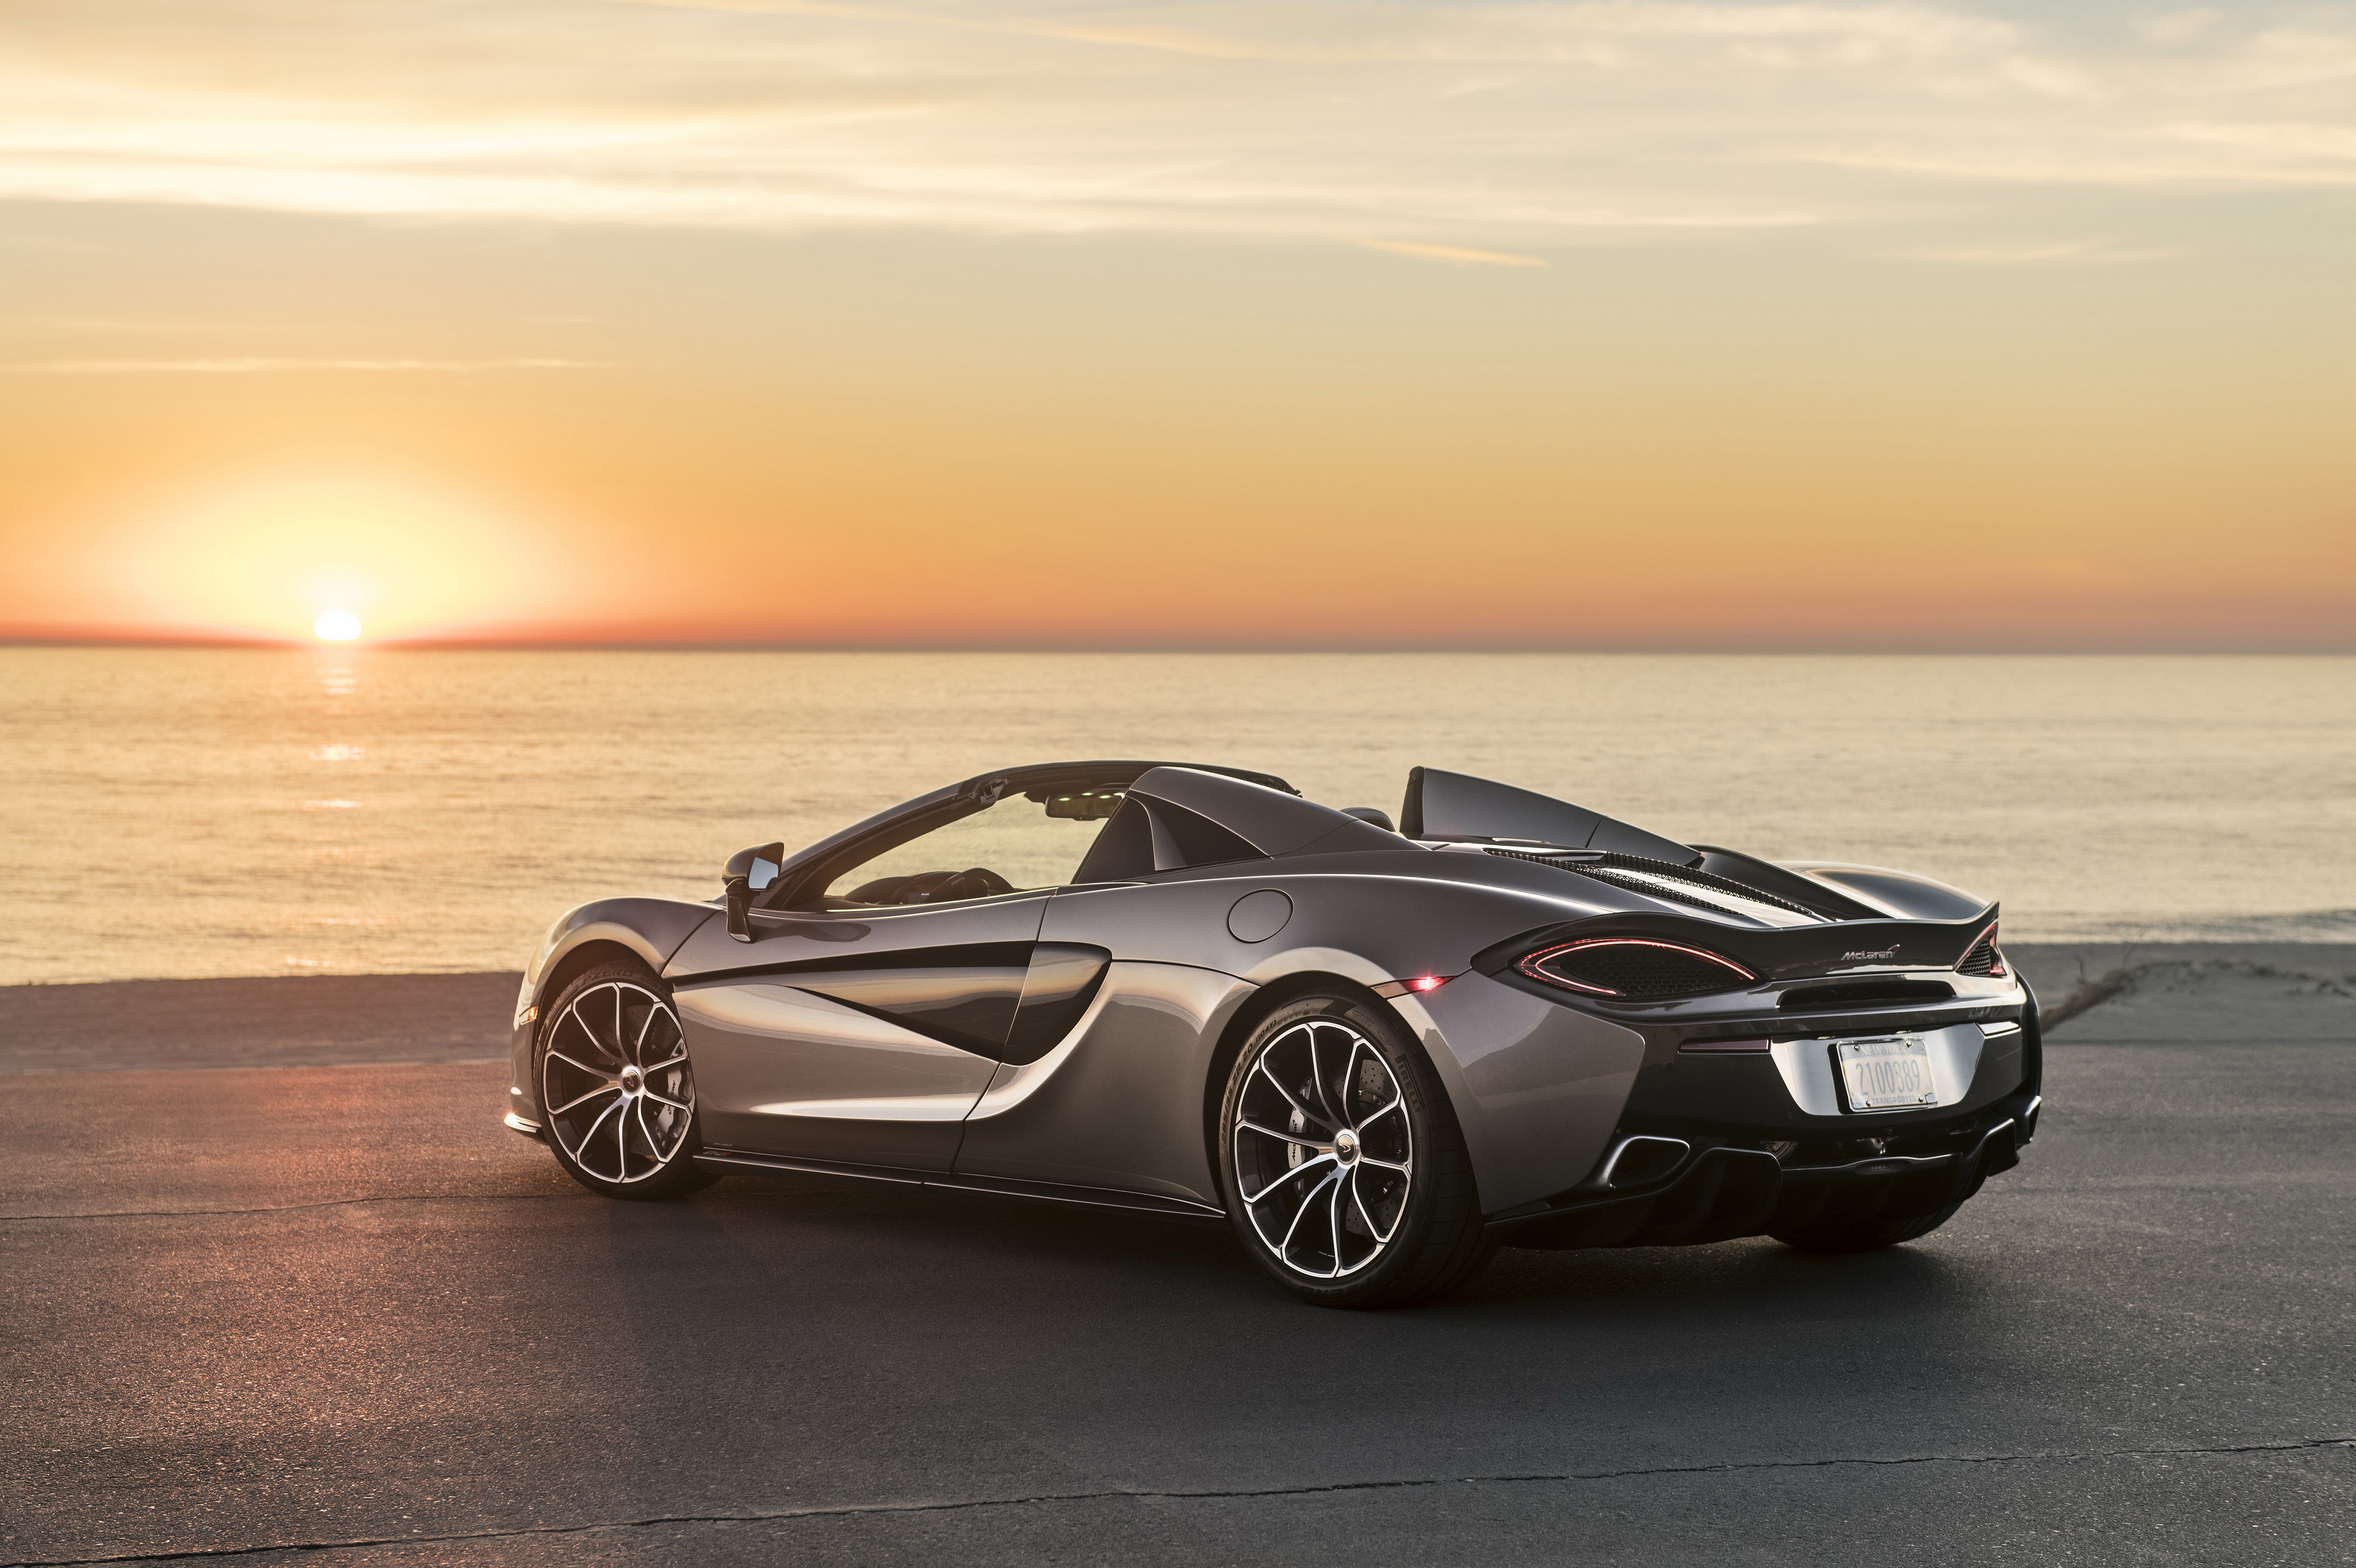 McLaren 570S Spider 2018 Rear, HD Cars, 4k Wallpaper, Image, Background, Photo and Picture